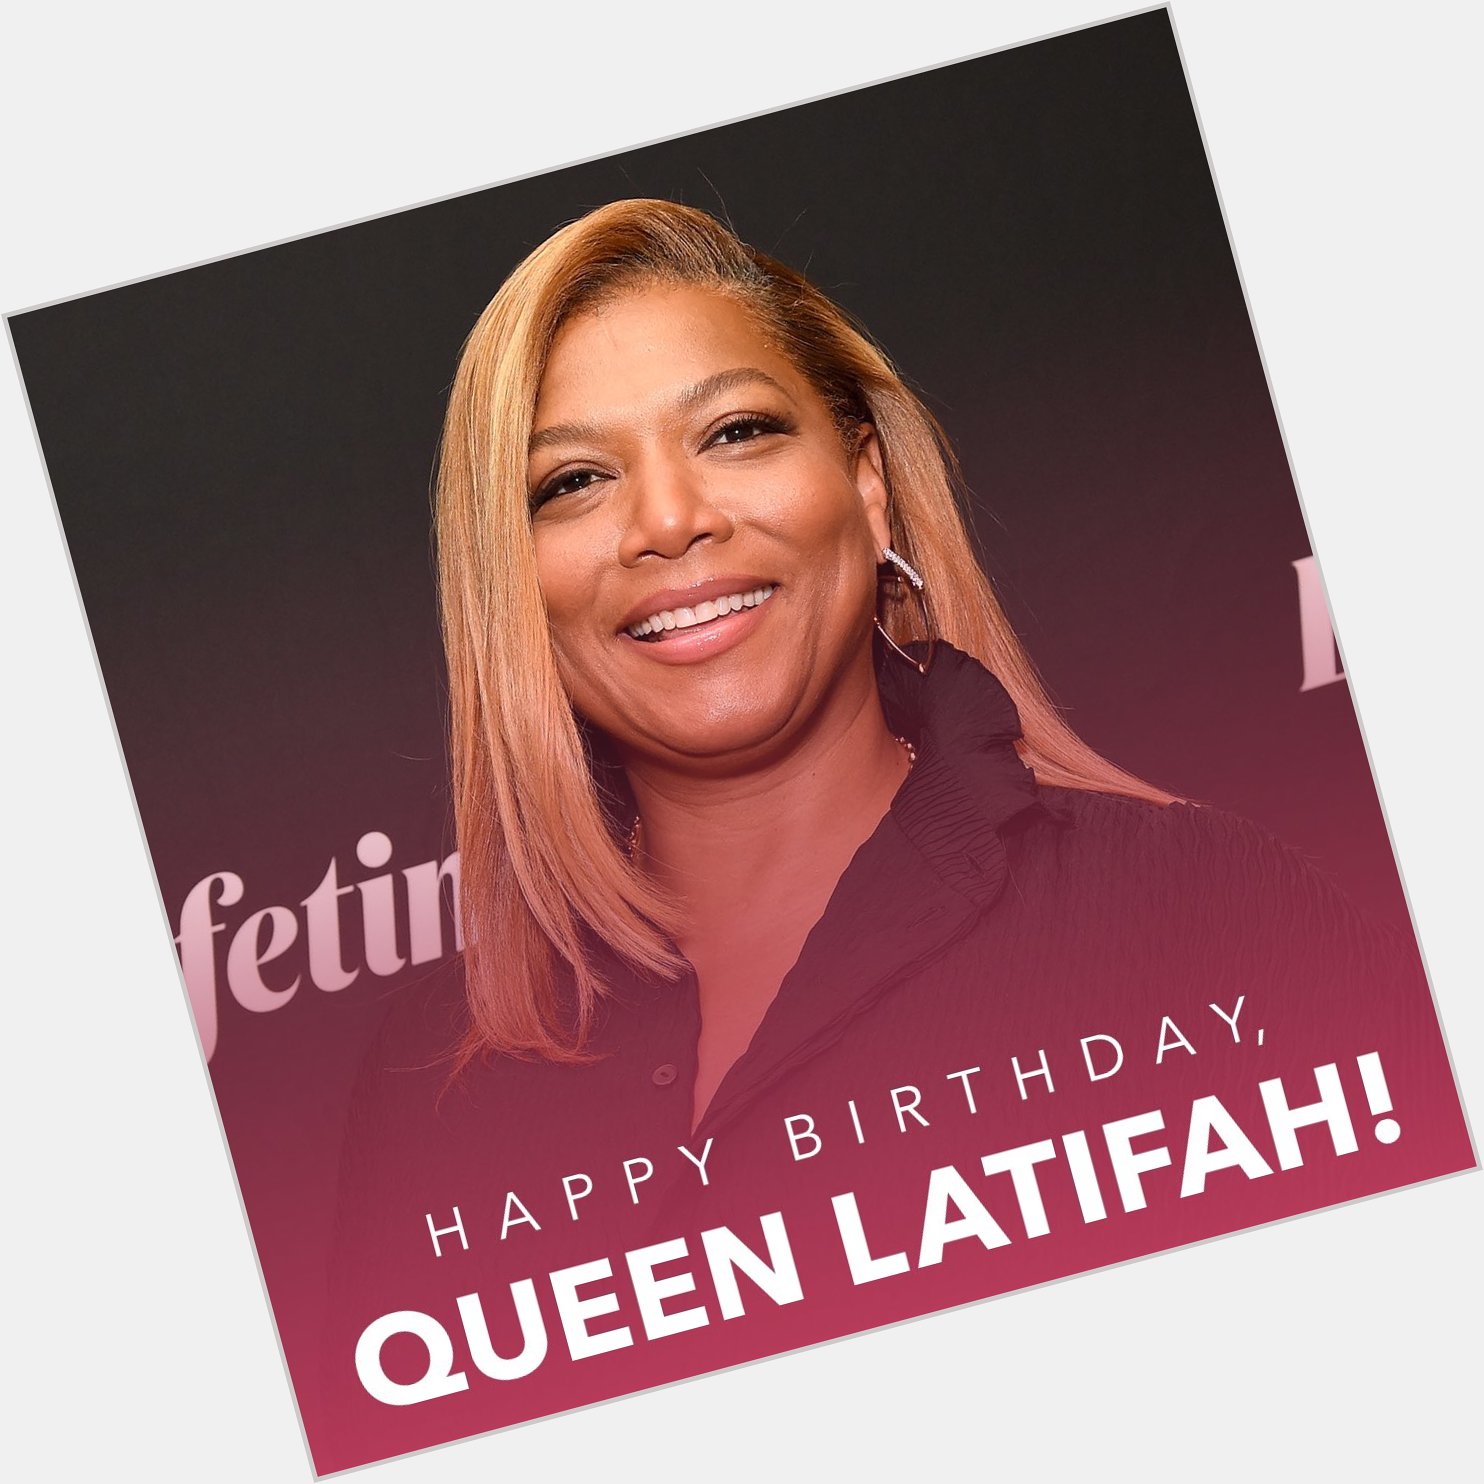 All Hail the Queen on her special day! Happy Birthday Queen Latifah 